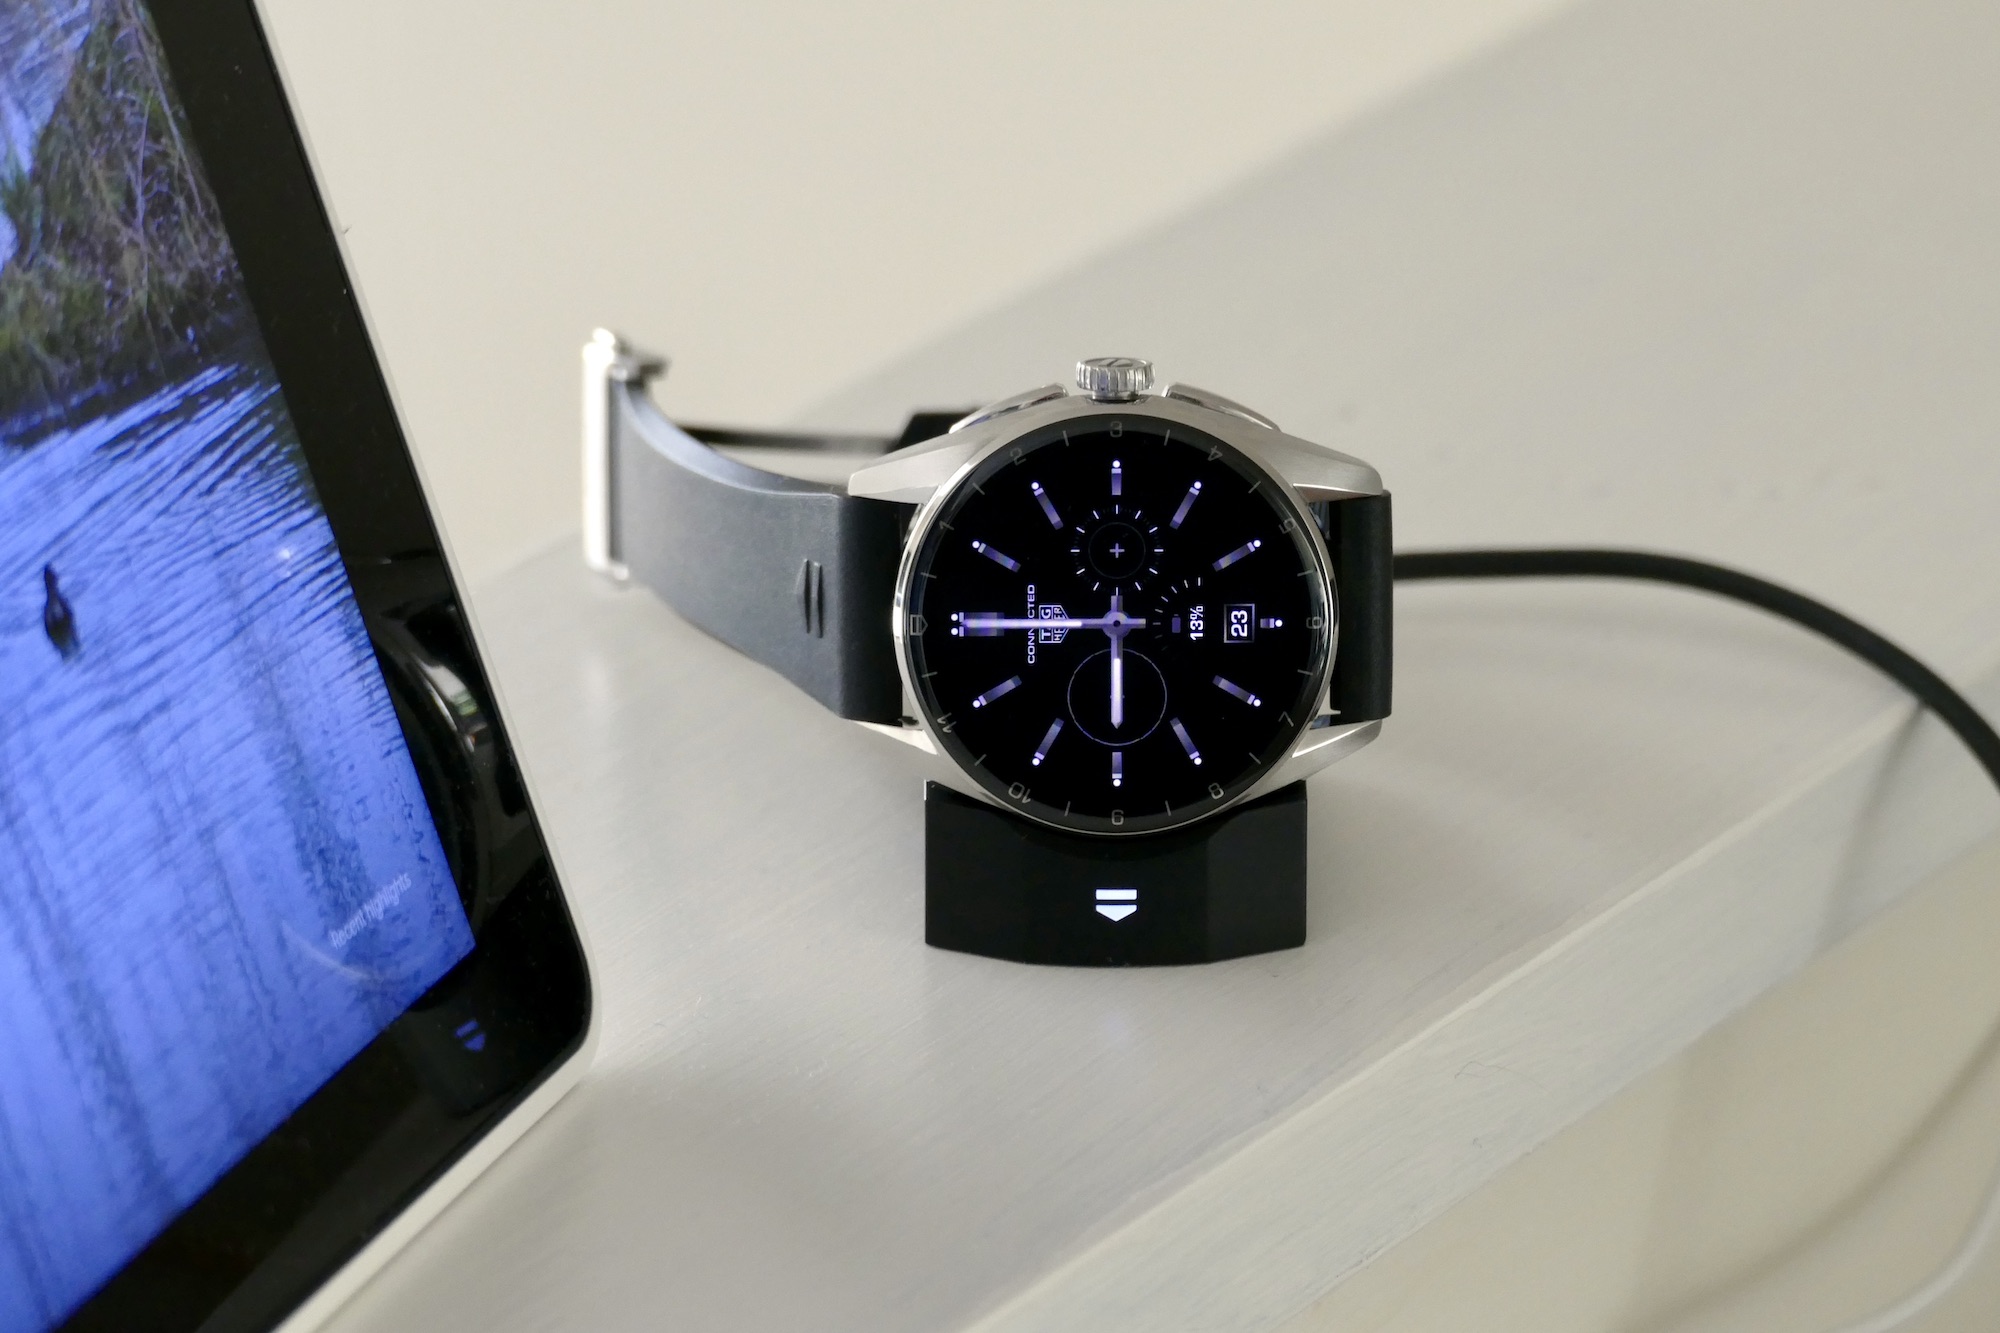 From LV's New Smartwatch to LinkedIn Audio and More!